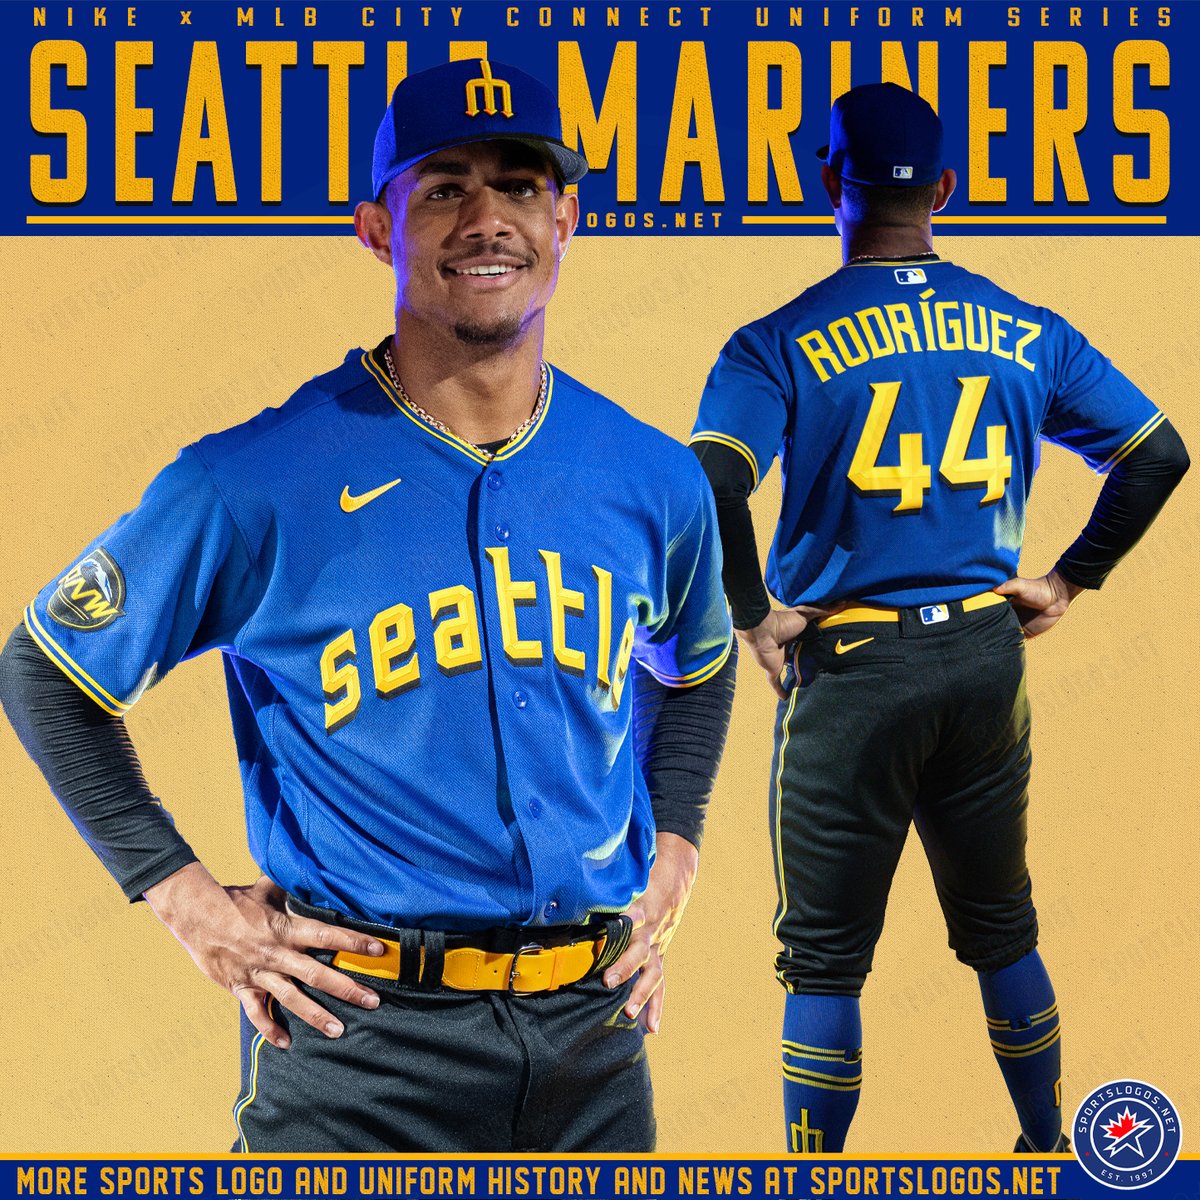 mariners nike city connect